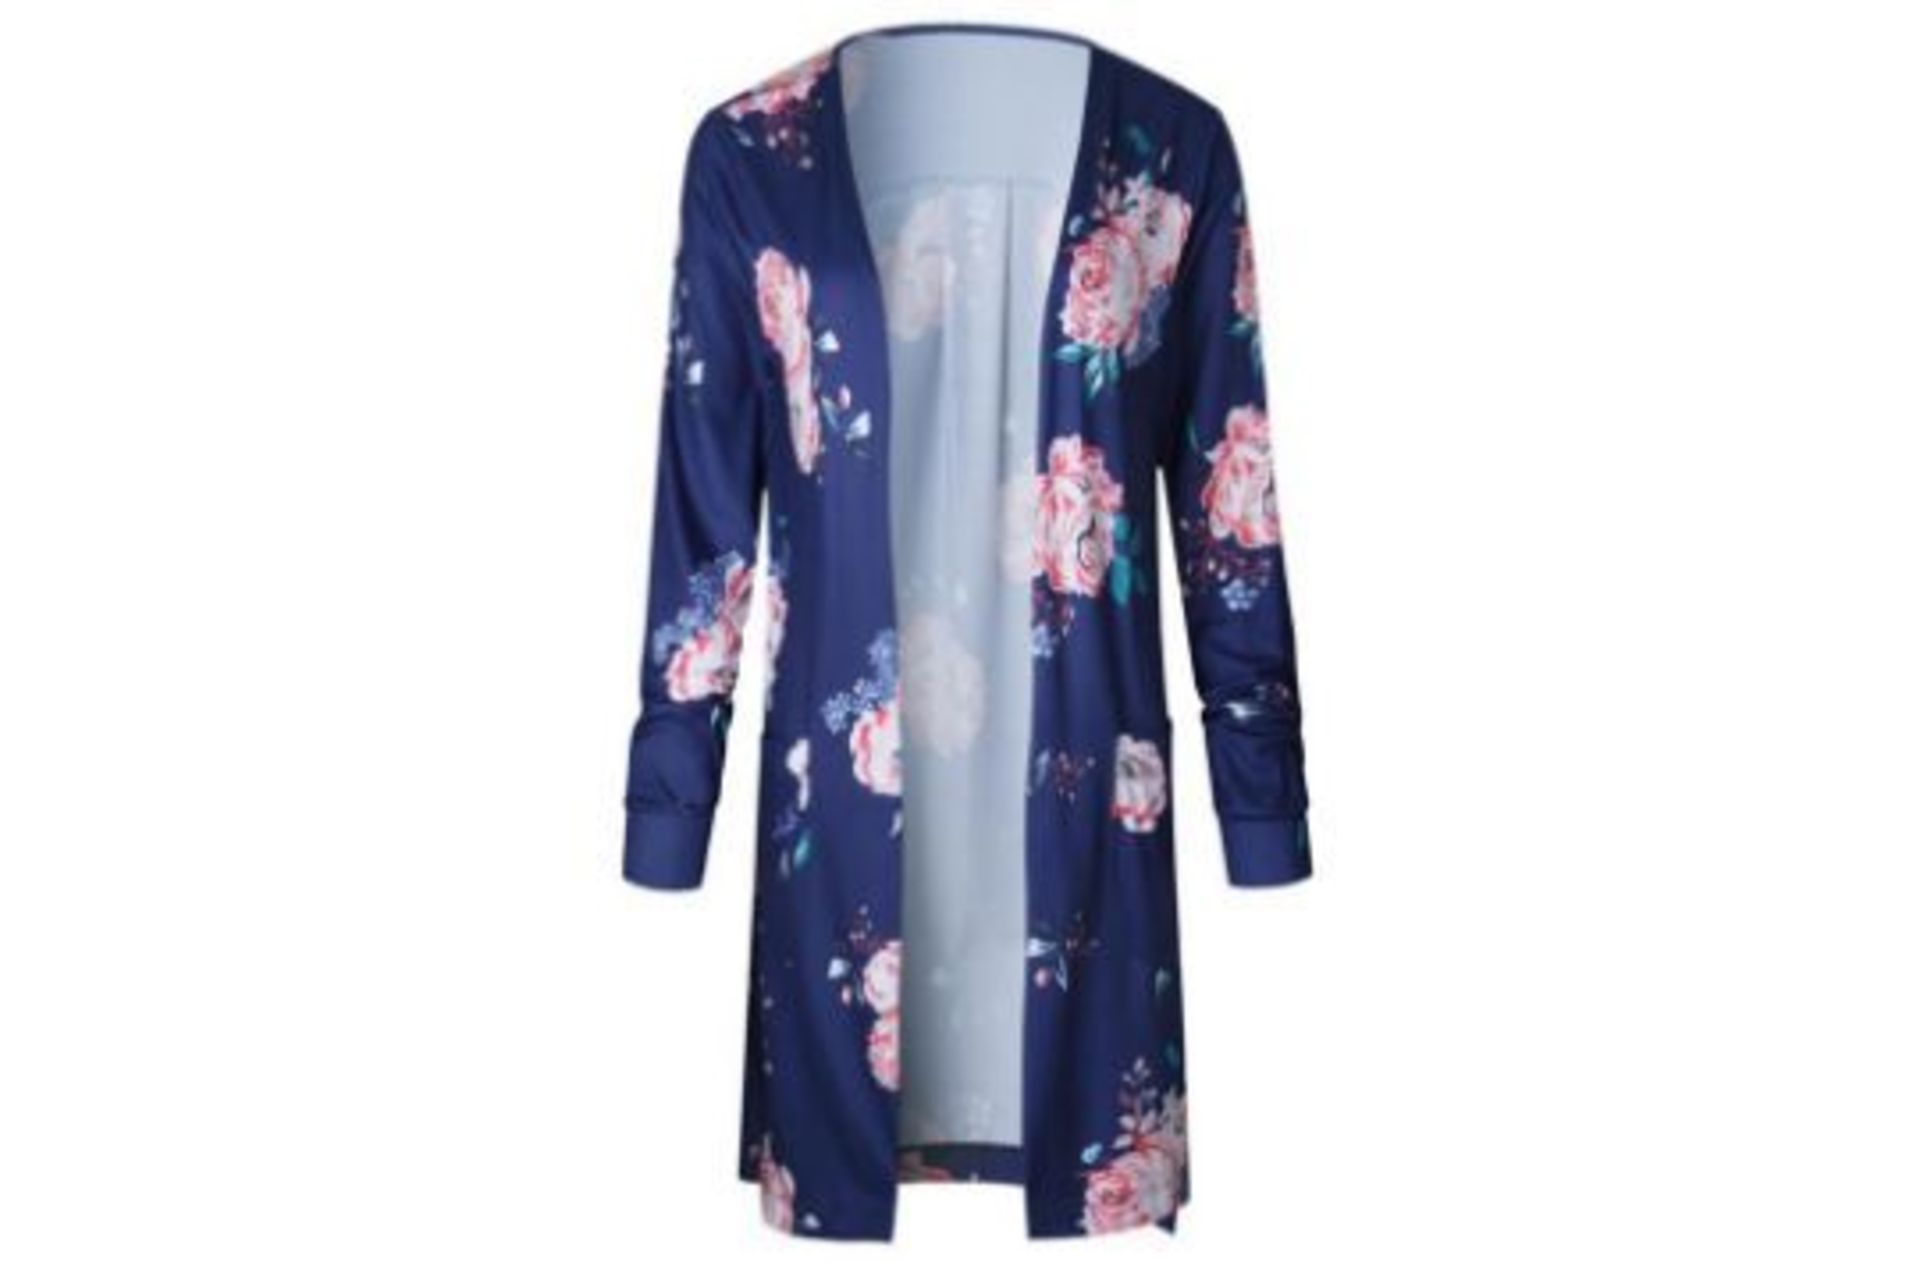 20 X BRAND NEW FLORAL BLACK CARDIGANS (SIZES MAY VARY) S1P